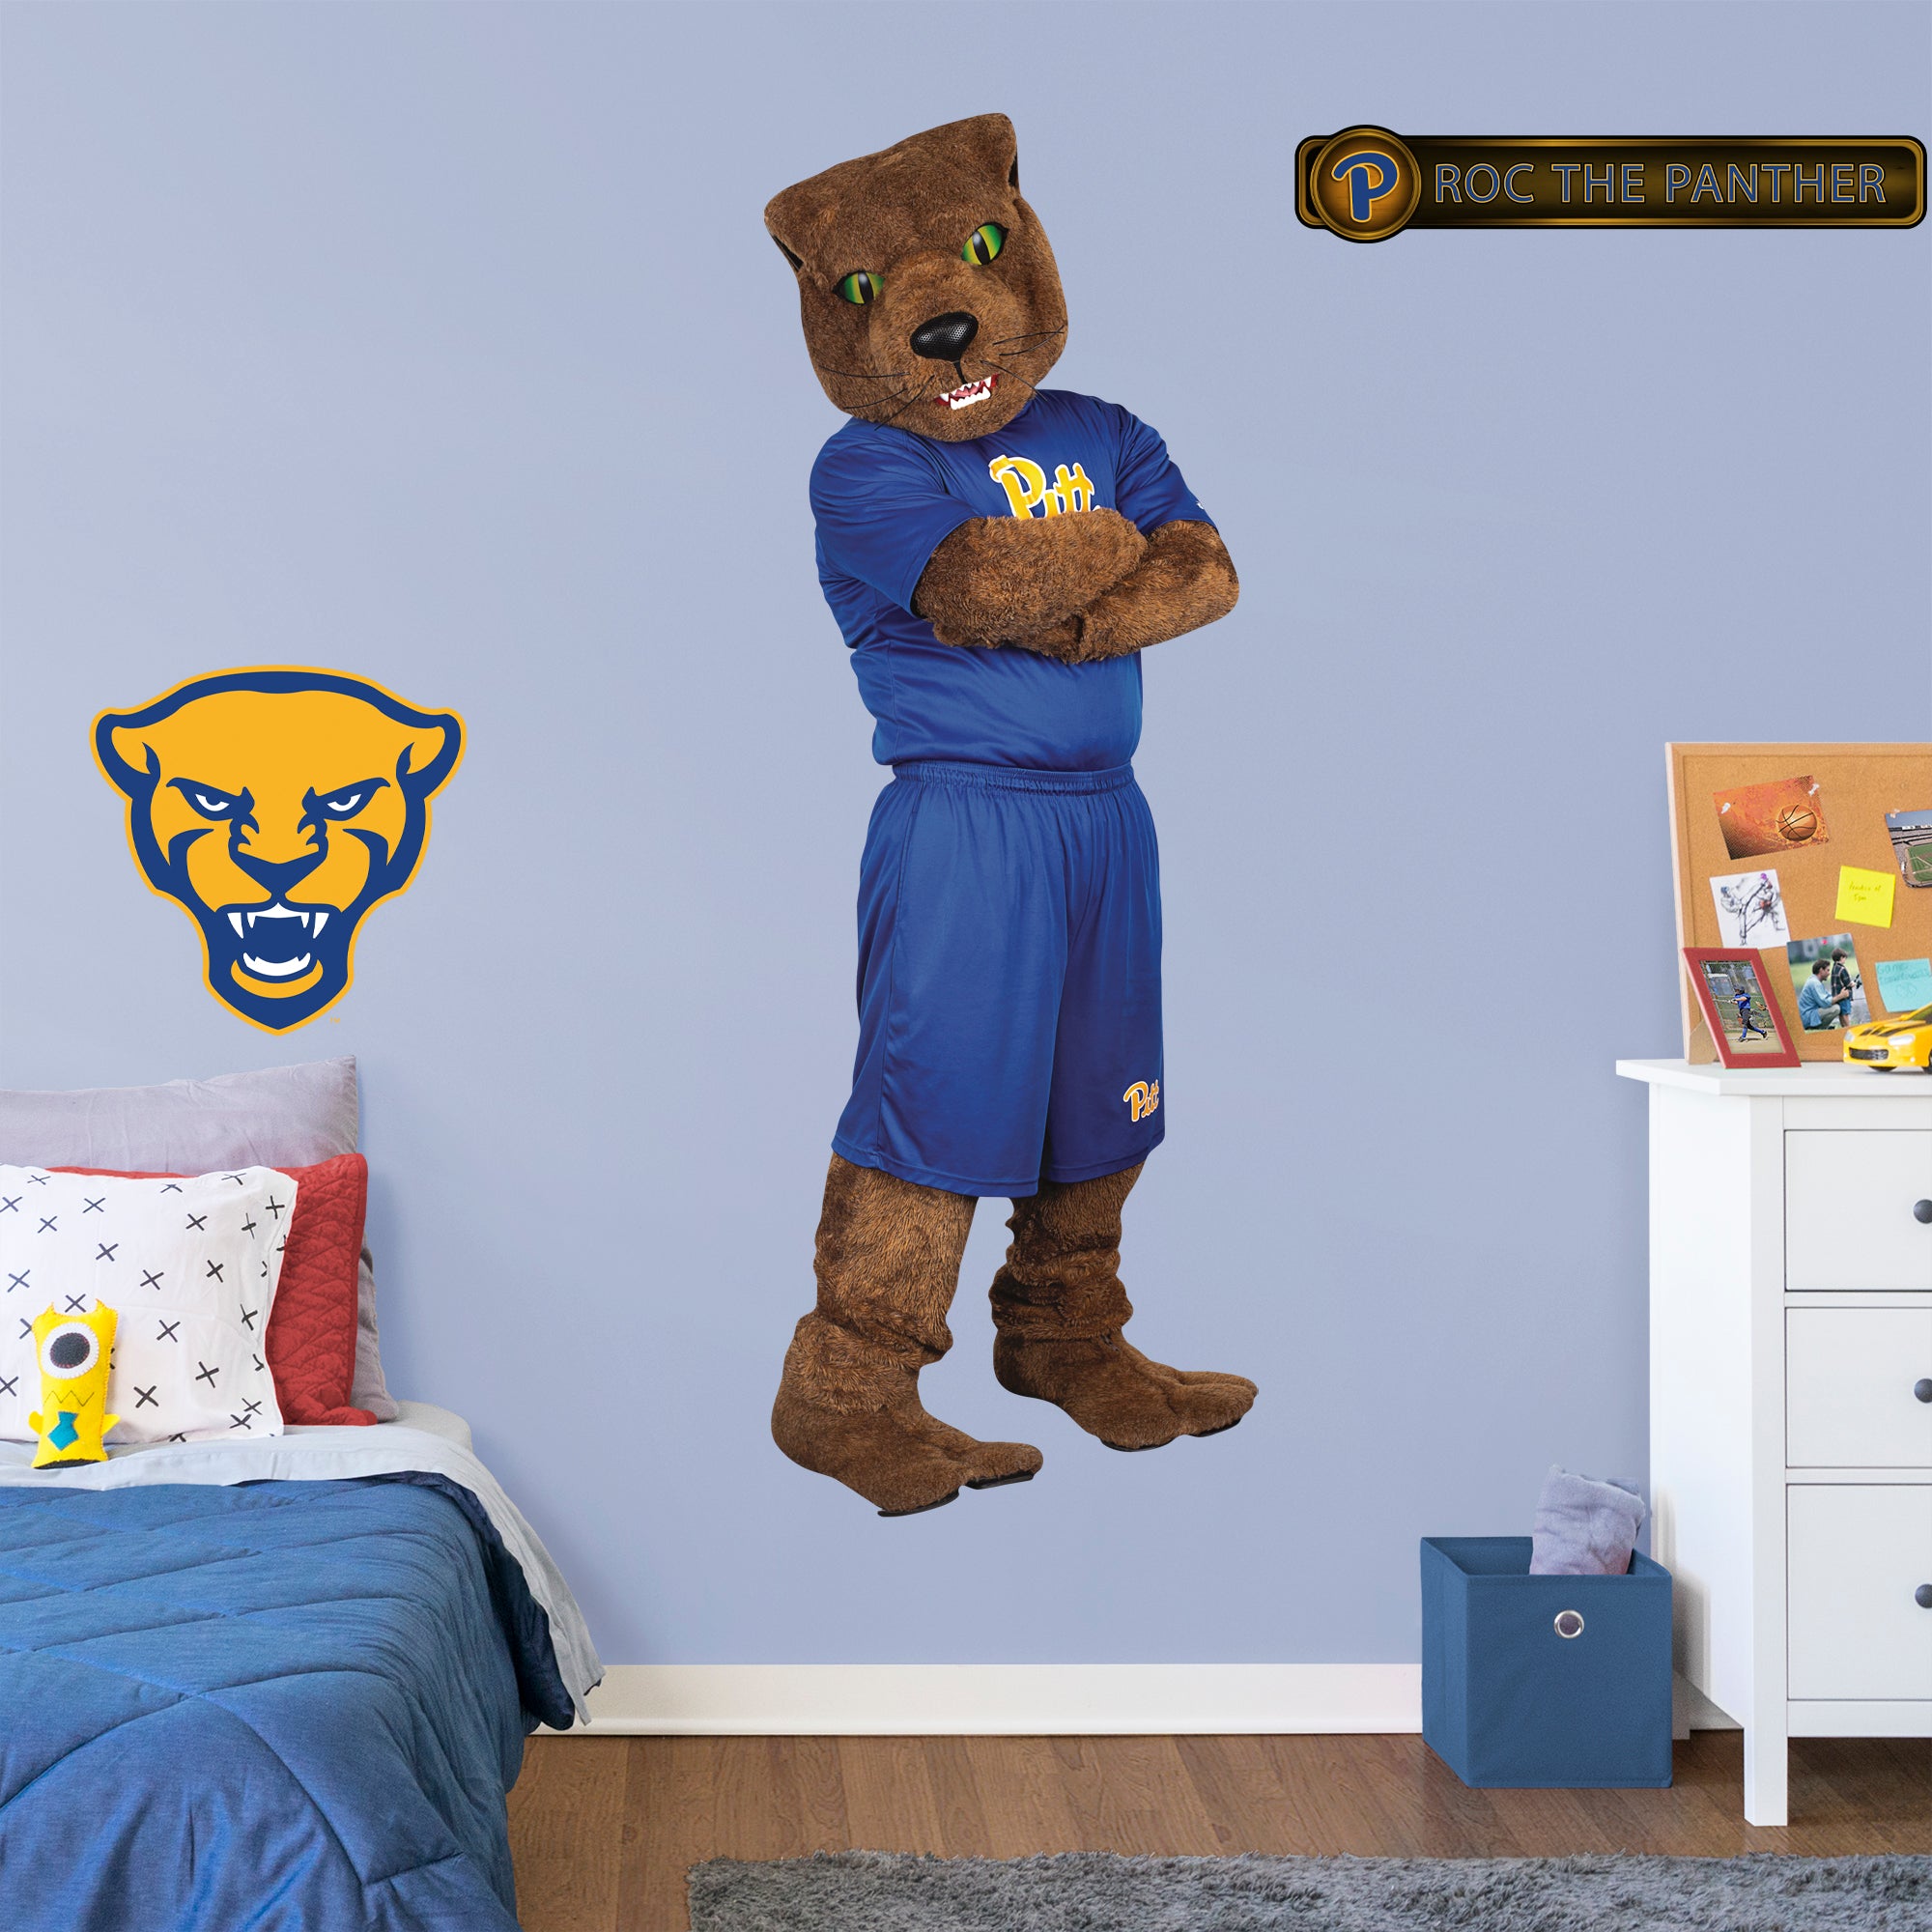 Pittsburgh Panthers: Roc the Panther Mascot - Officially Licensed Removable Wall Decal Life-Size Mascot + 2 Decals by Fathead |